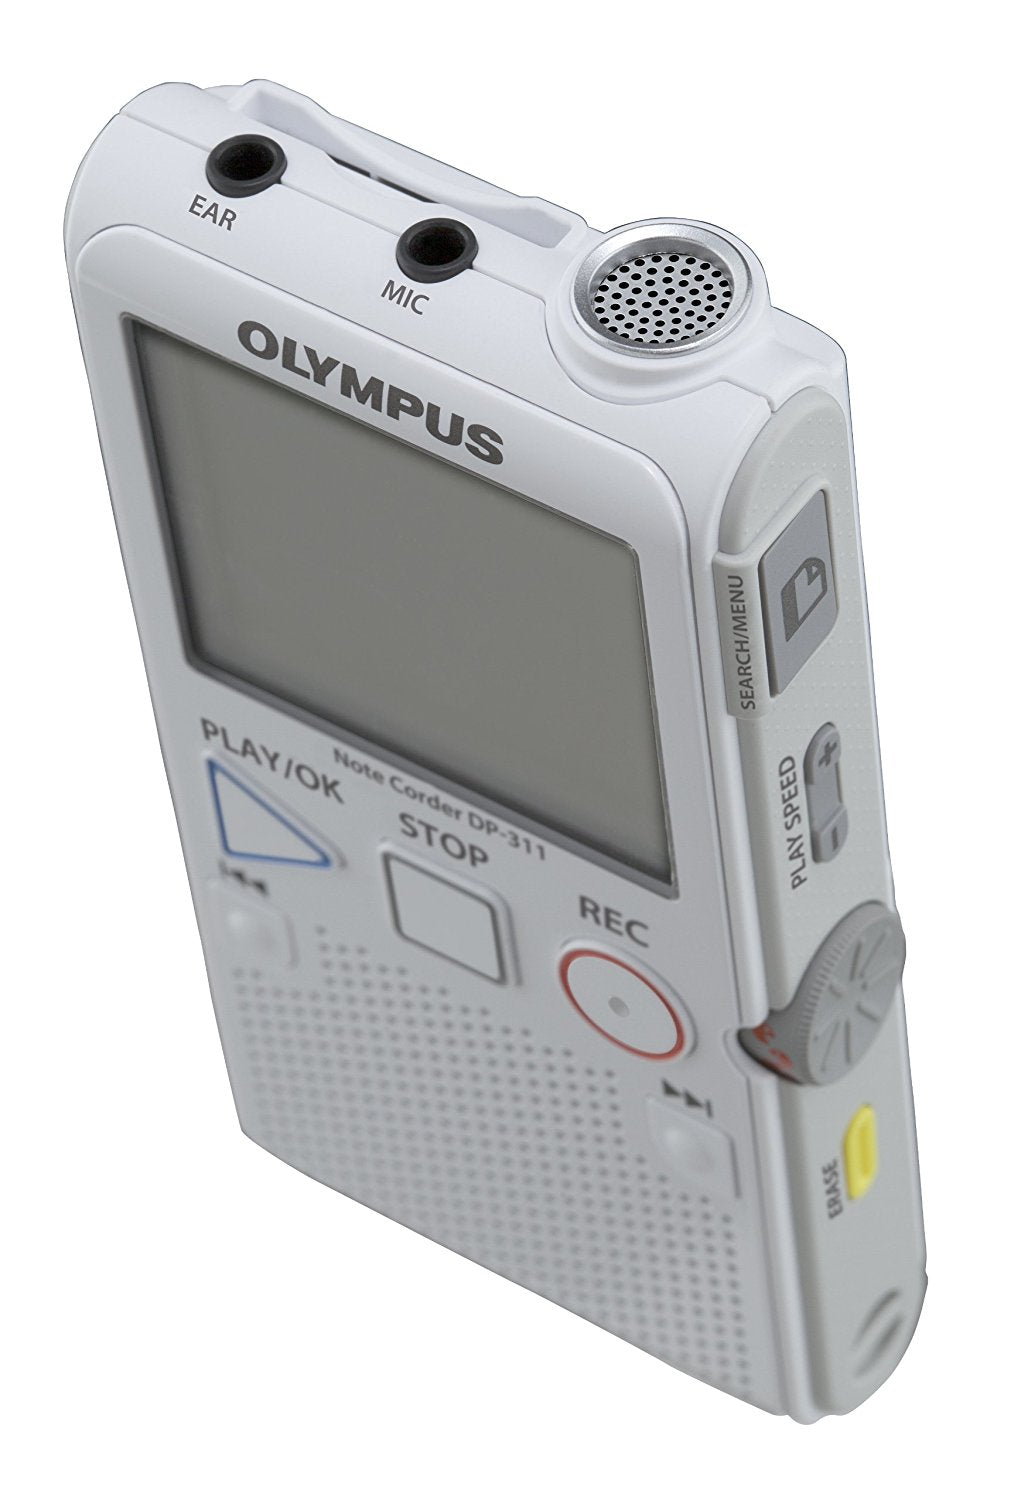 Olympus DP-311 2GB Voice Recorder, Silver with SD Card Slot & Built-in Stand (2 AAA batteries required) - Refurbished